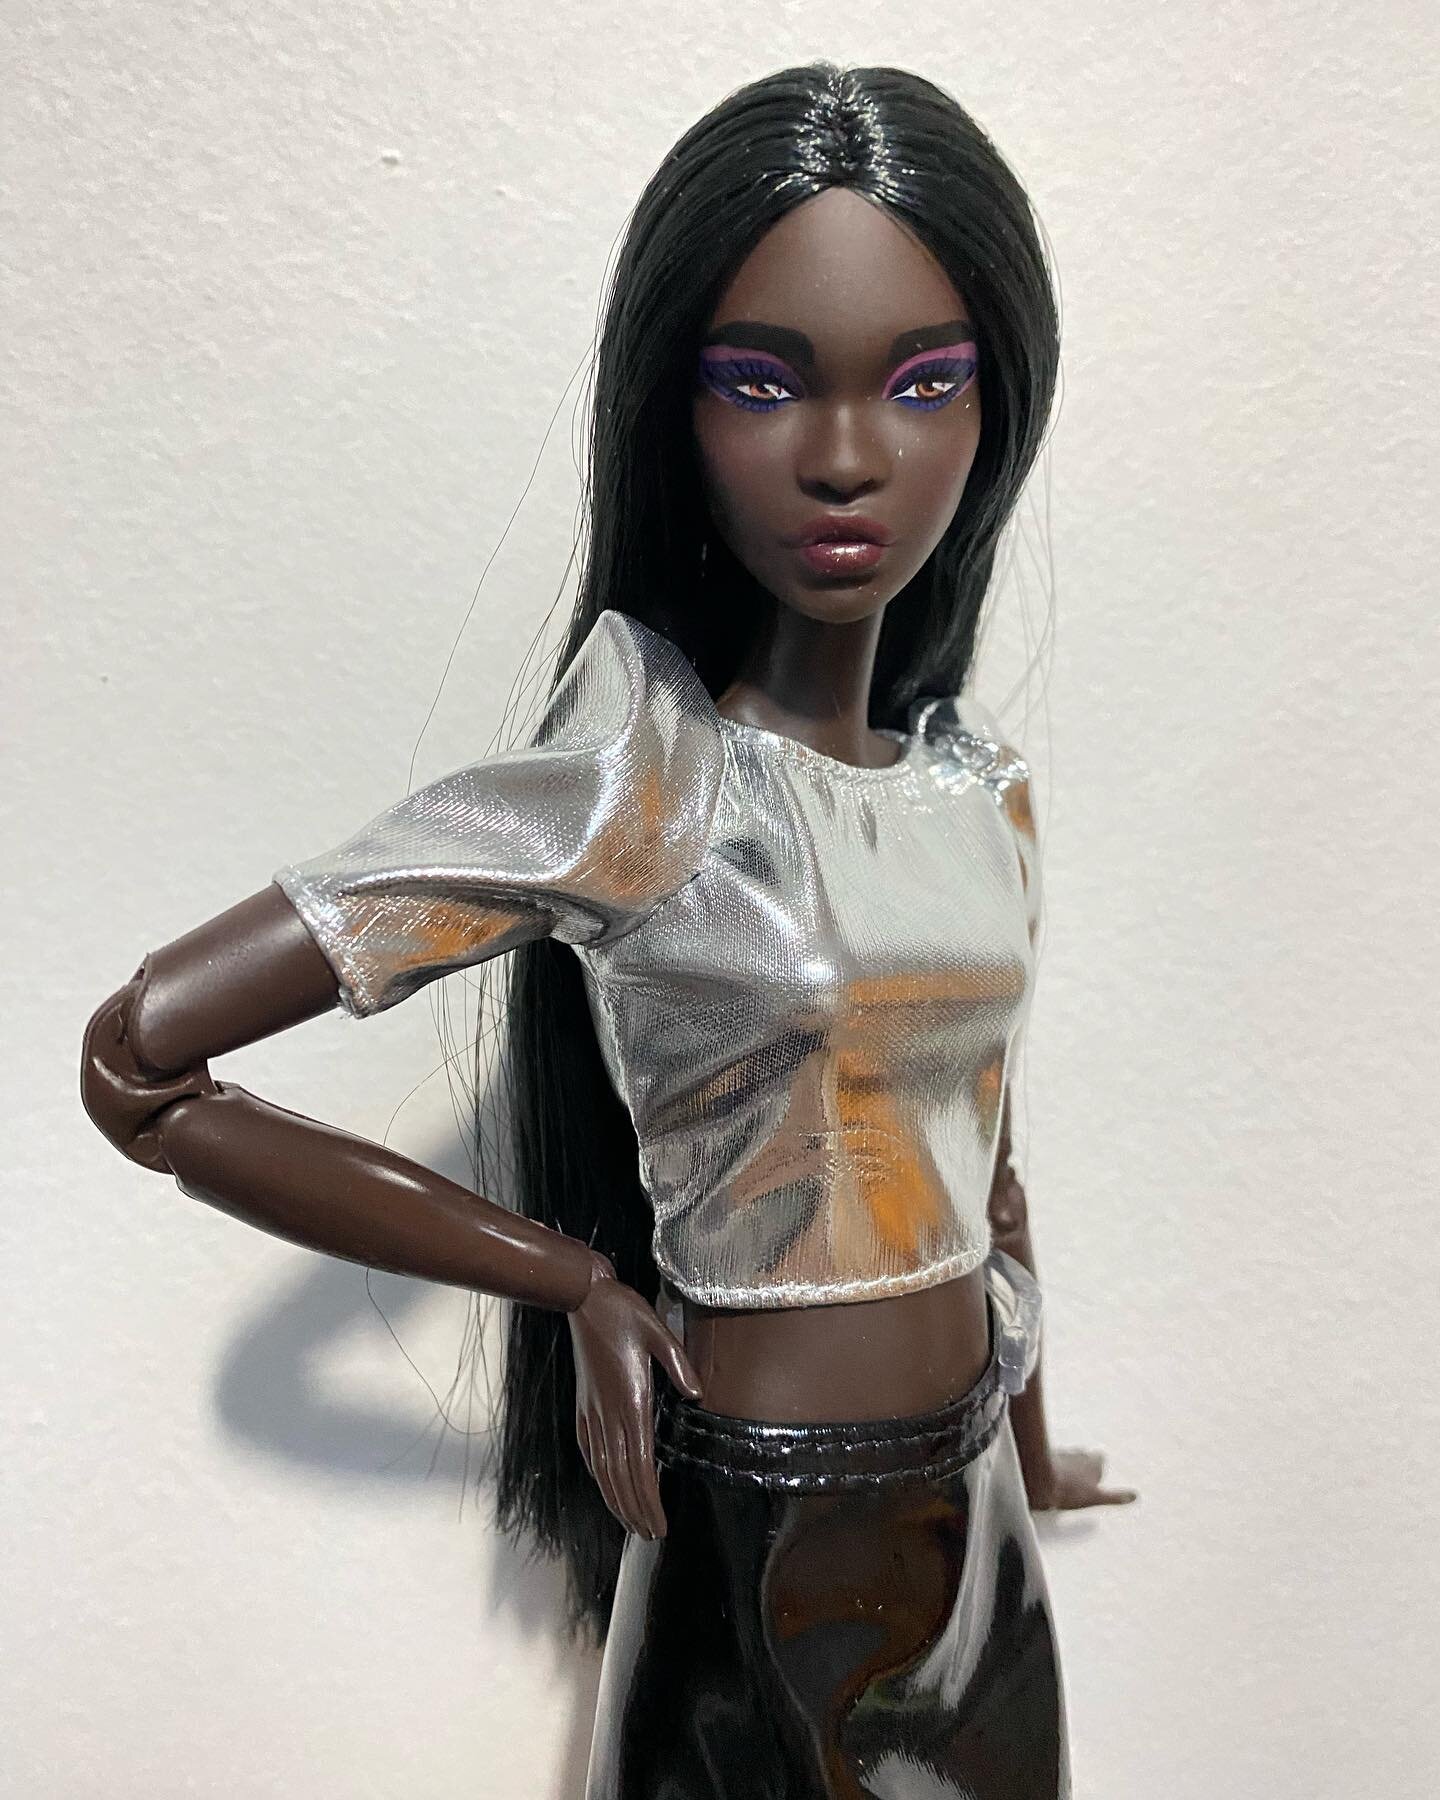 Easily one of the top-5 sculpts @mattel has ever done! Simone is the Looks #10 Barbie doll, designed by @billgreening for @mattelcreations . Would love to see her with an Afro too! 
@barbie @mattel @barbiestyle #mattel #barbie #barbiestyle #model #ba